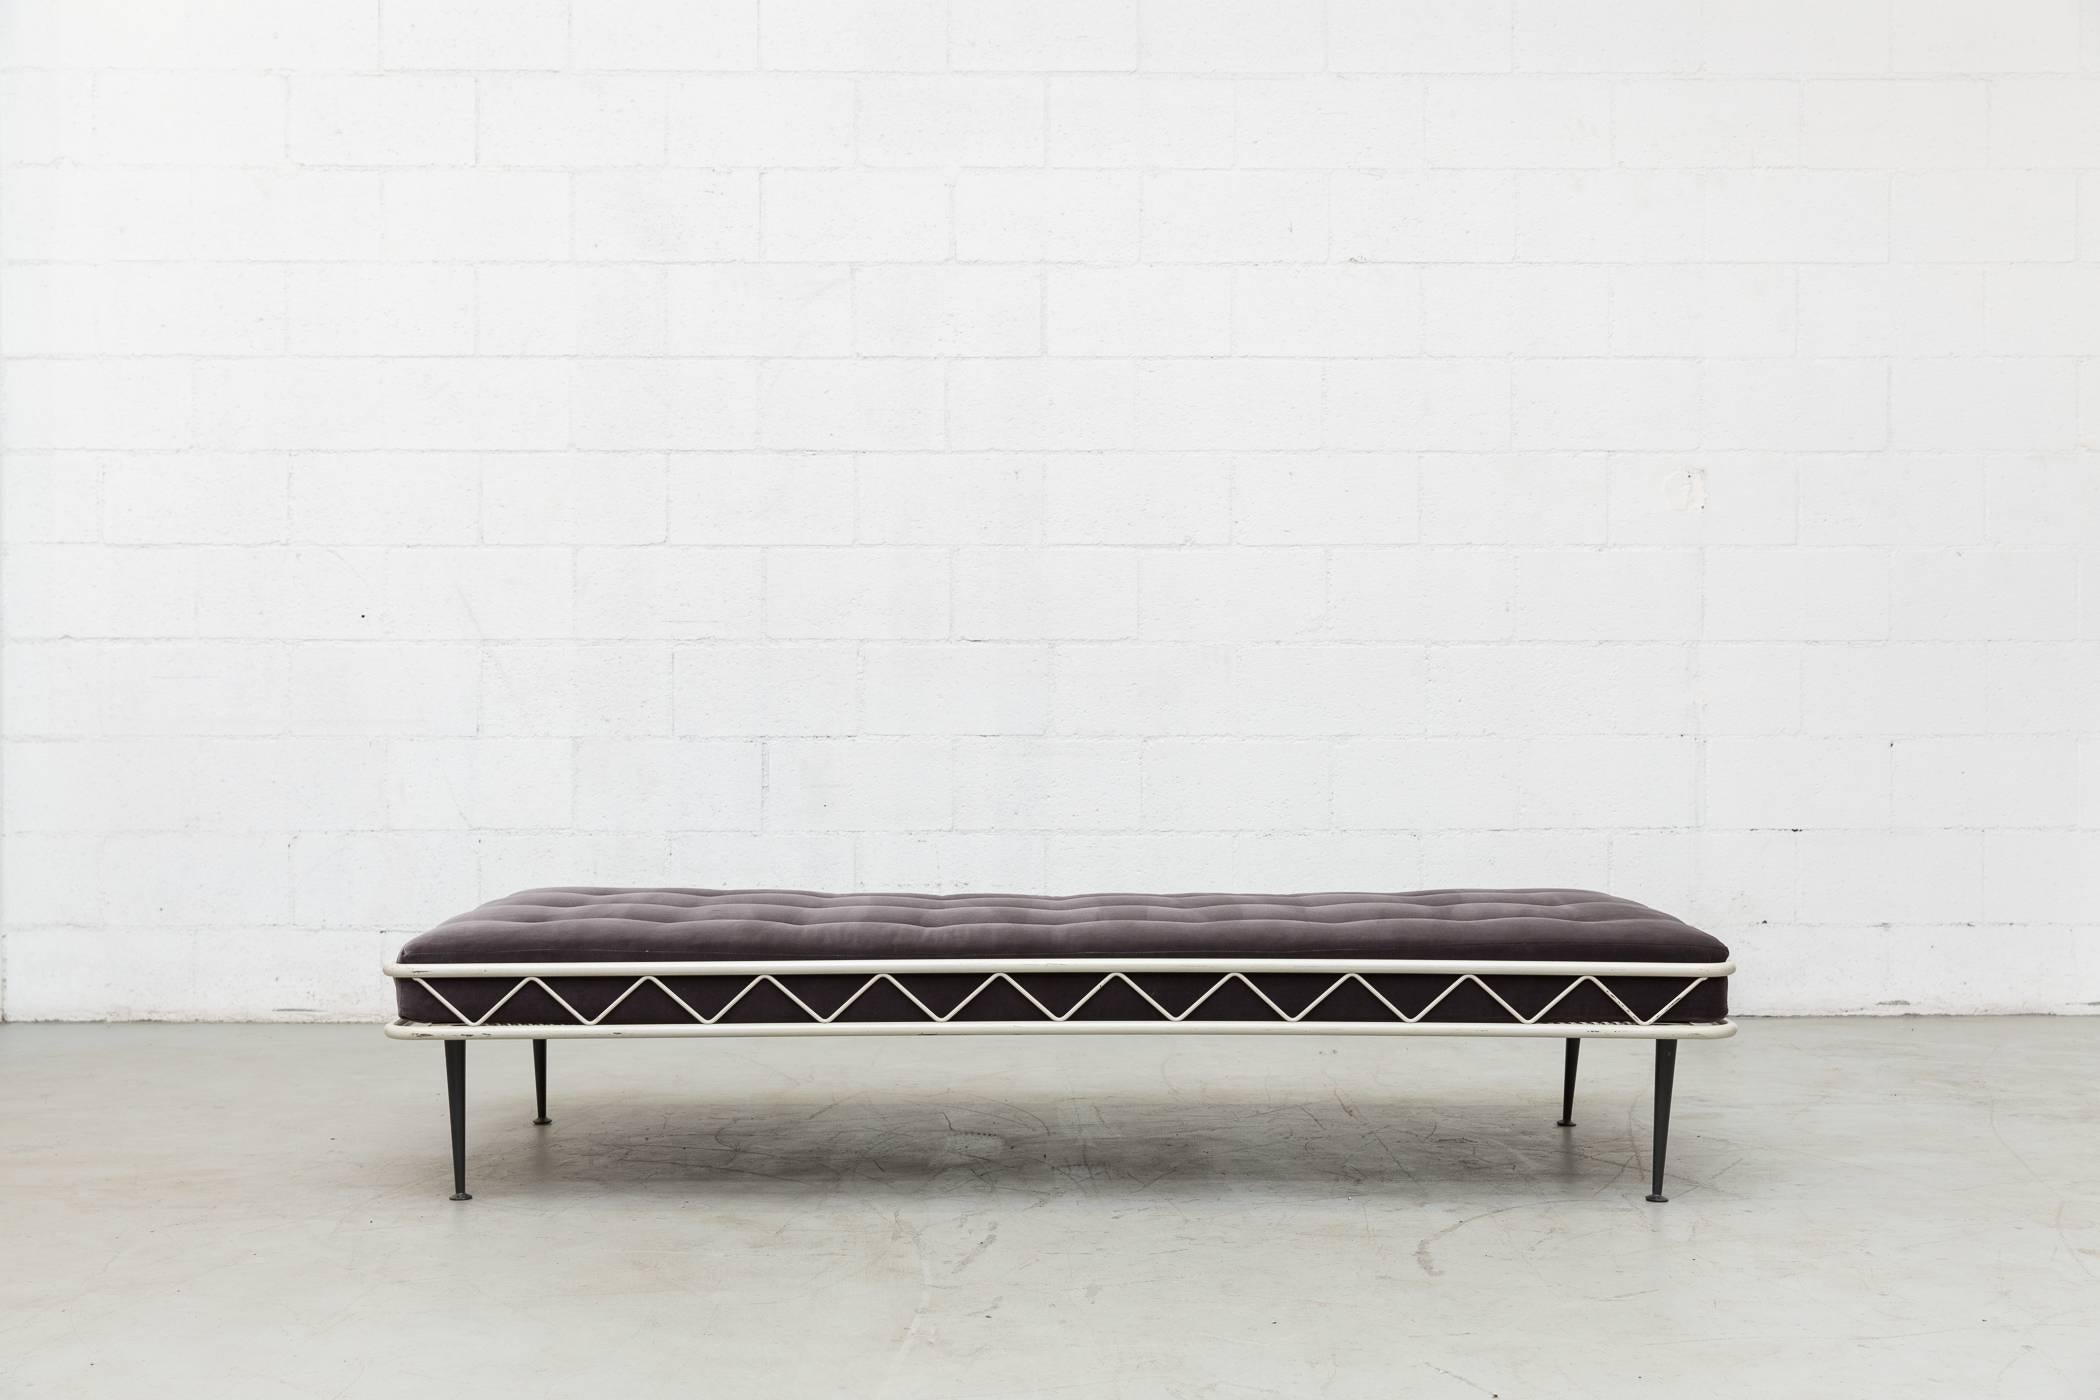 Architectural light grey enameled metal daybed with newly made tufted grey velvet mattress and dark charcoal grey metal legs. Frame in original condition with visible wear consistent with its age and usage.